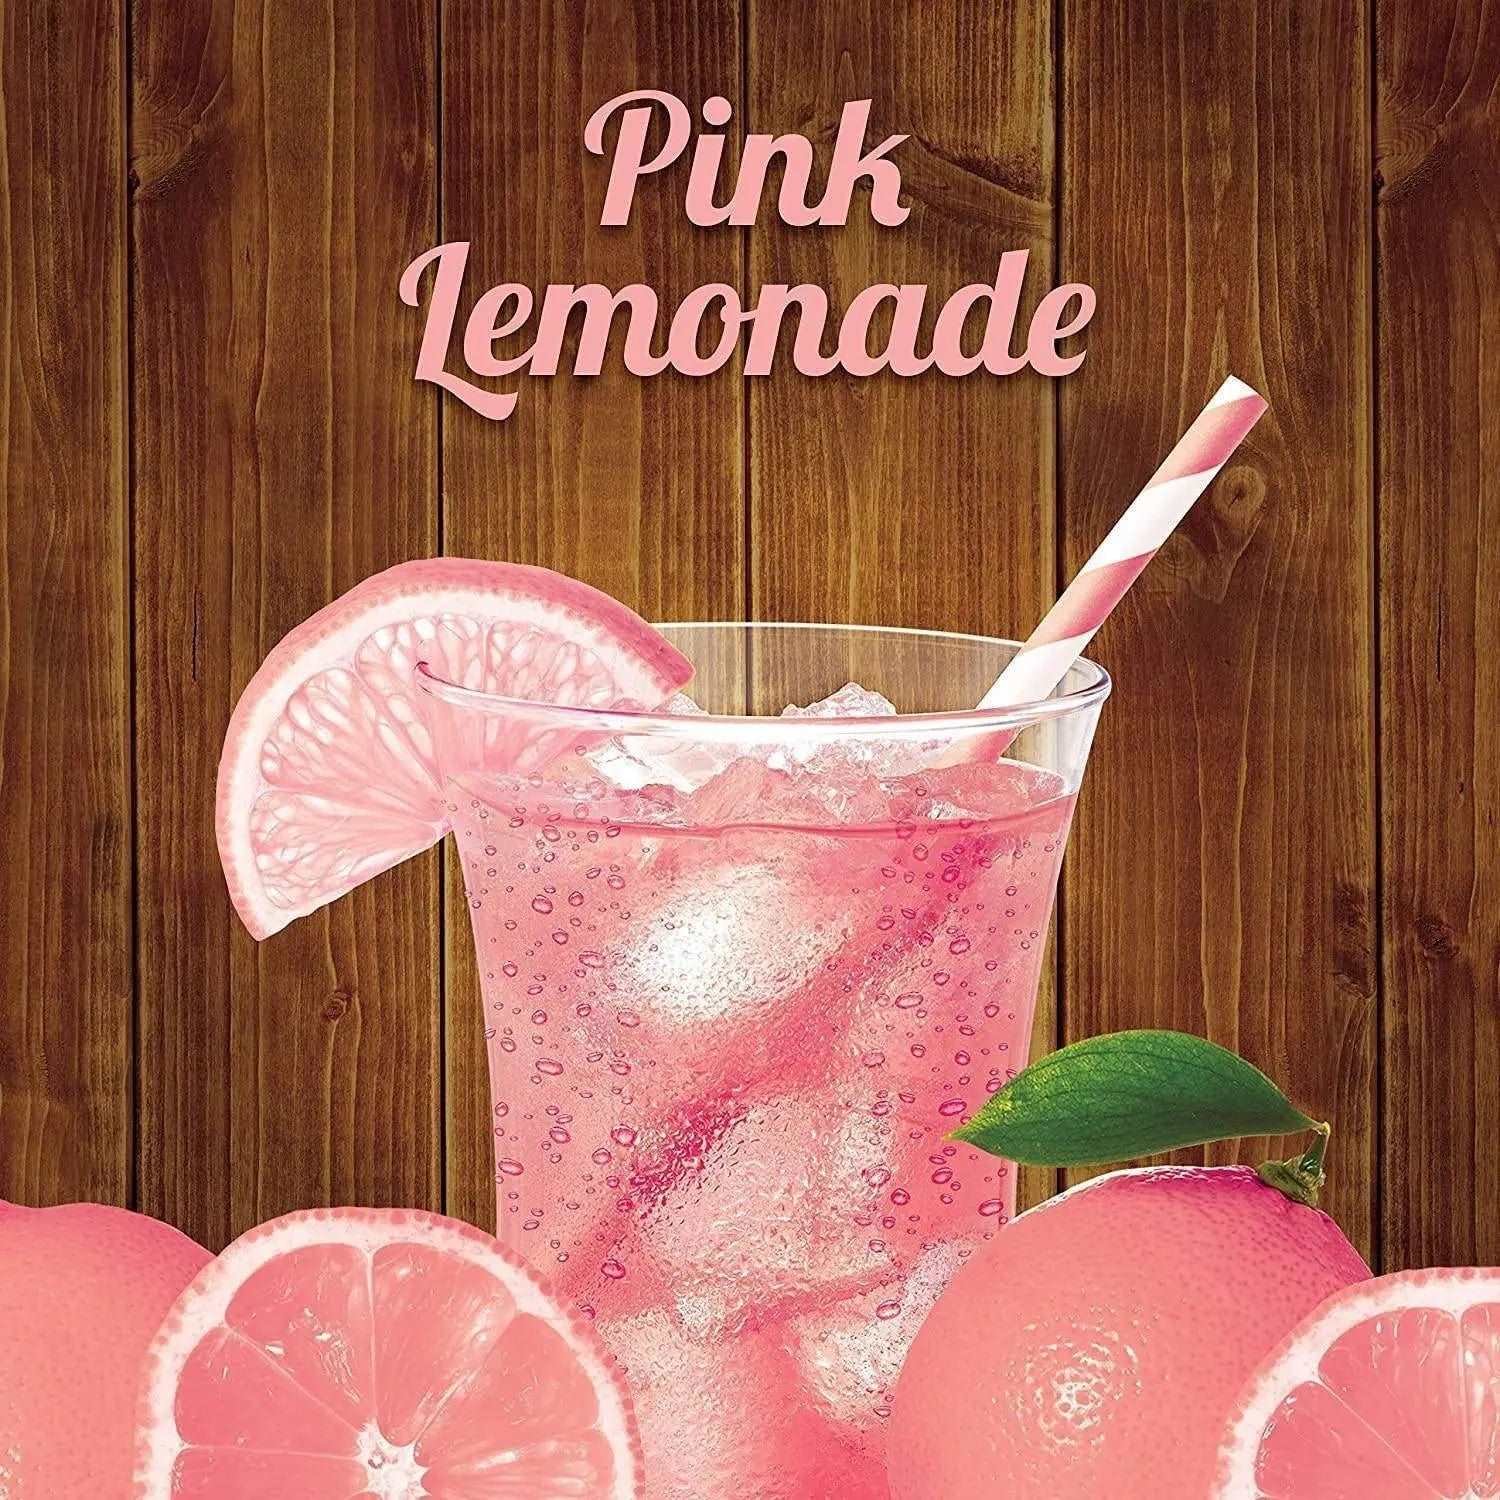 Wholesale prices with free shipping all over United States Country Time Pink Lemonade Drink Mix, pack of 2 - Steven Deals